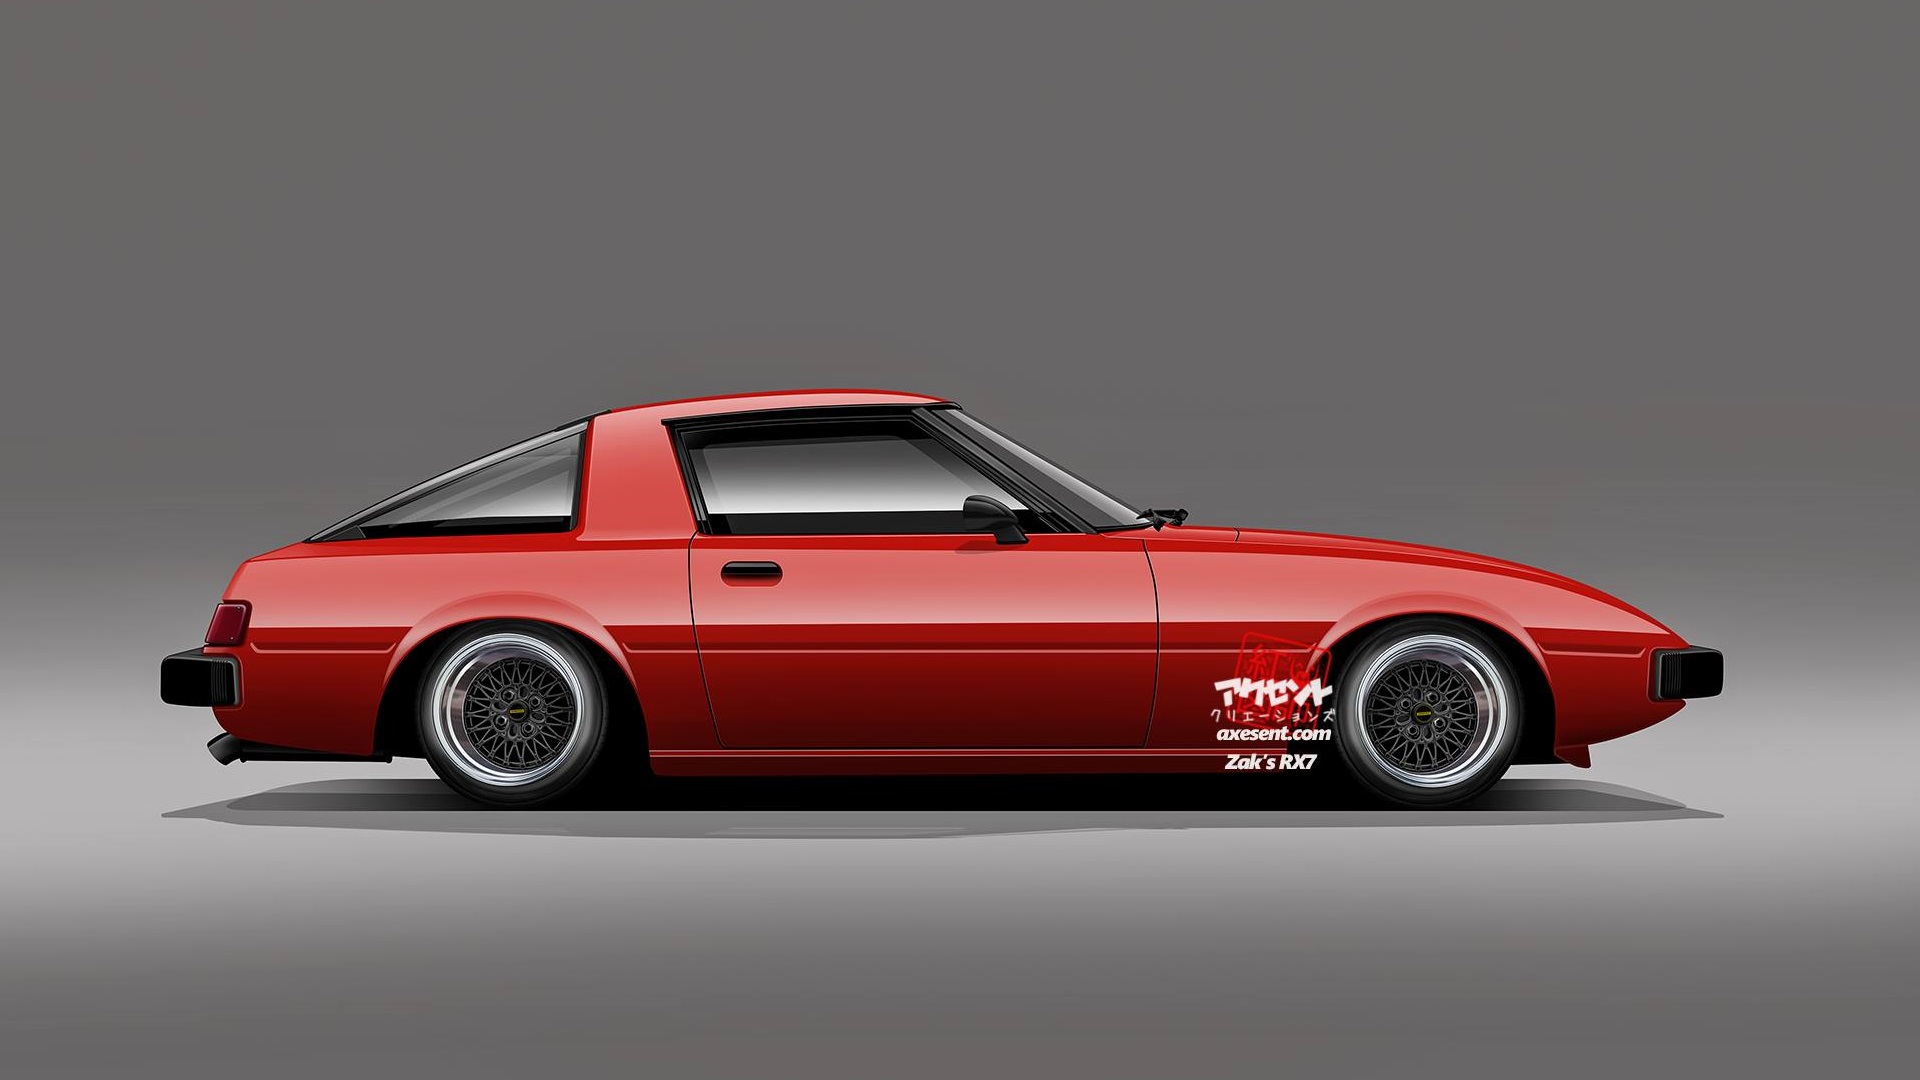 Axesent Creations Mazda RX 7 JDM Render Mazda Japanese Cars Side View Red Cars Mazda RX 7 FB 1920x1080